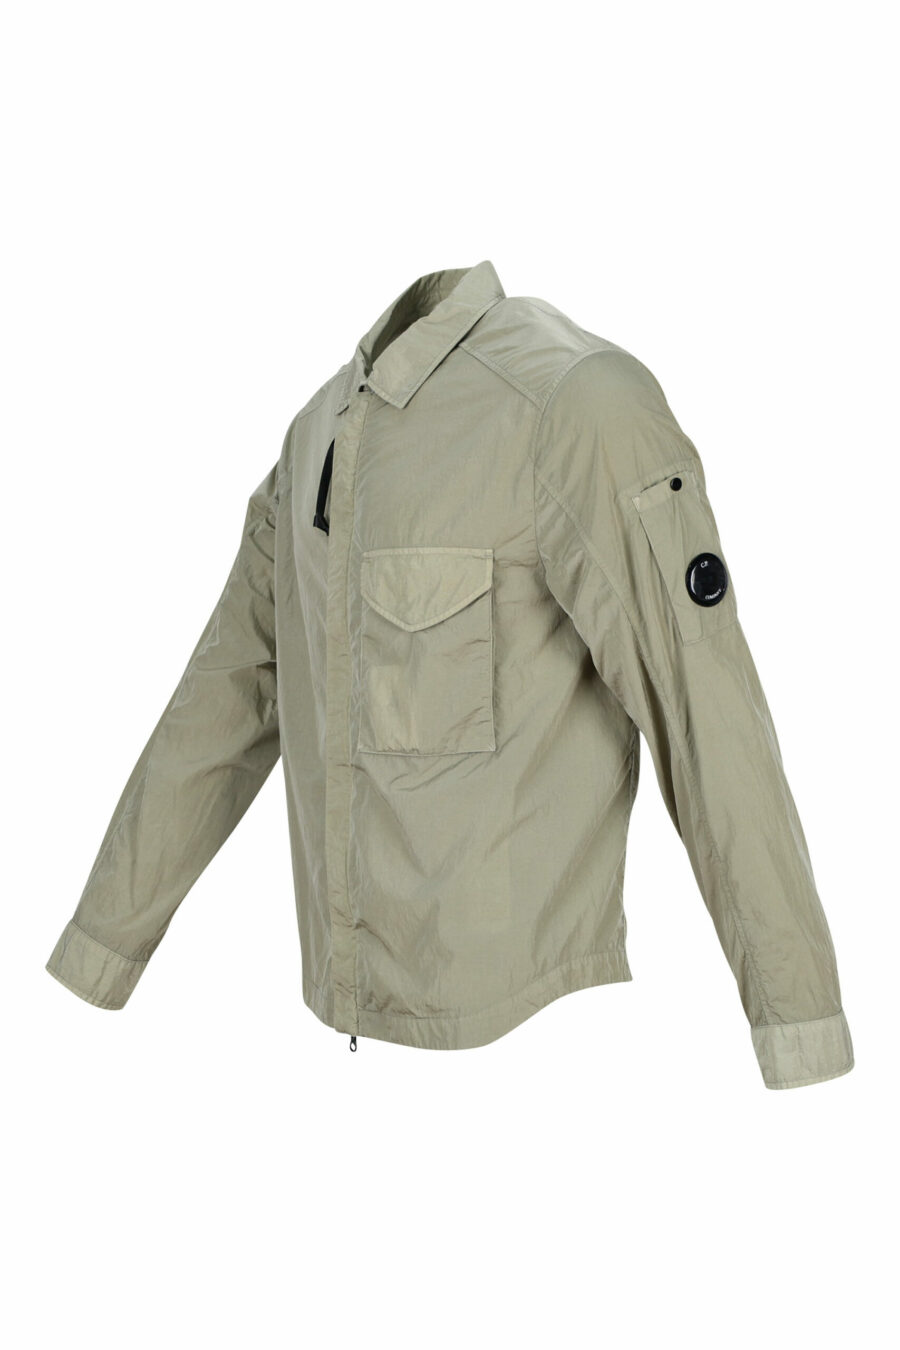 Chaqueta beige impermeable con logo lente lateral - 7620943555387 1 scaled